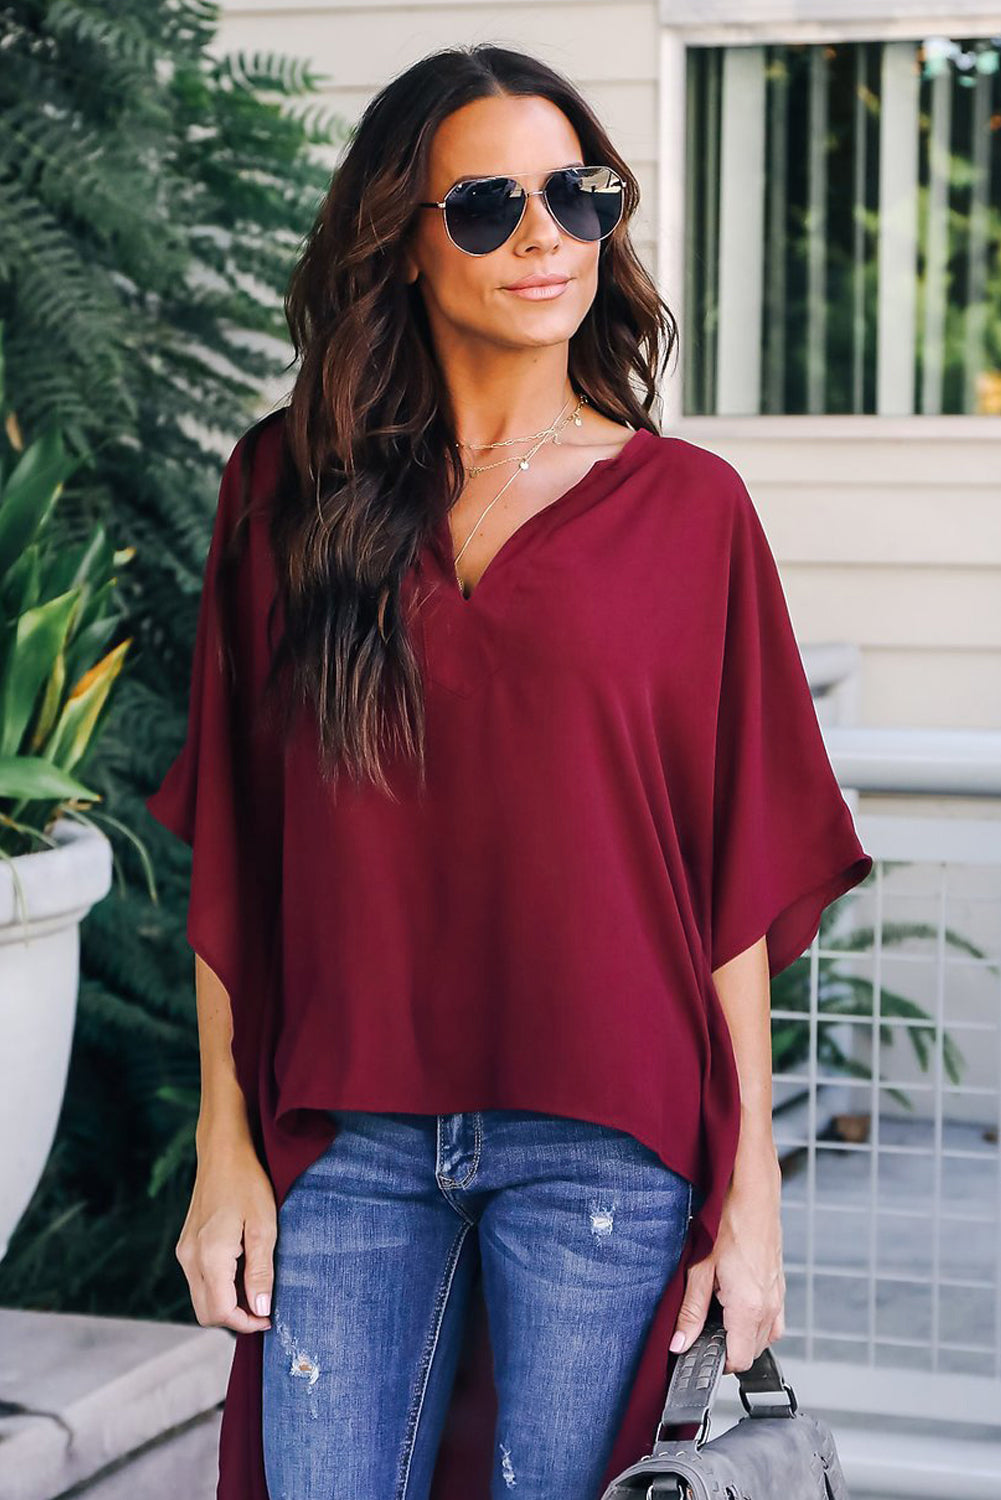 The Chic Top (Pink, Blue, Wine Red, Black)